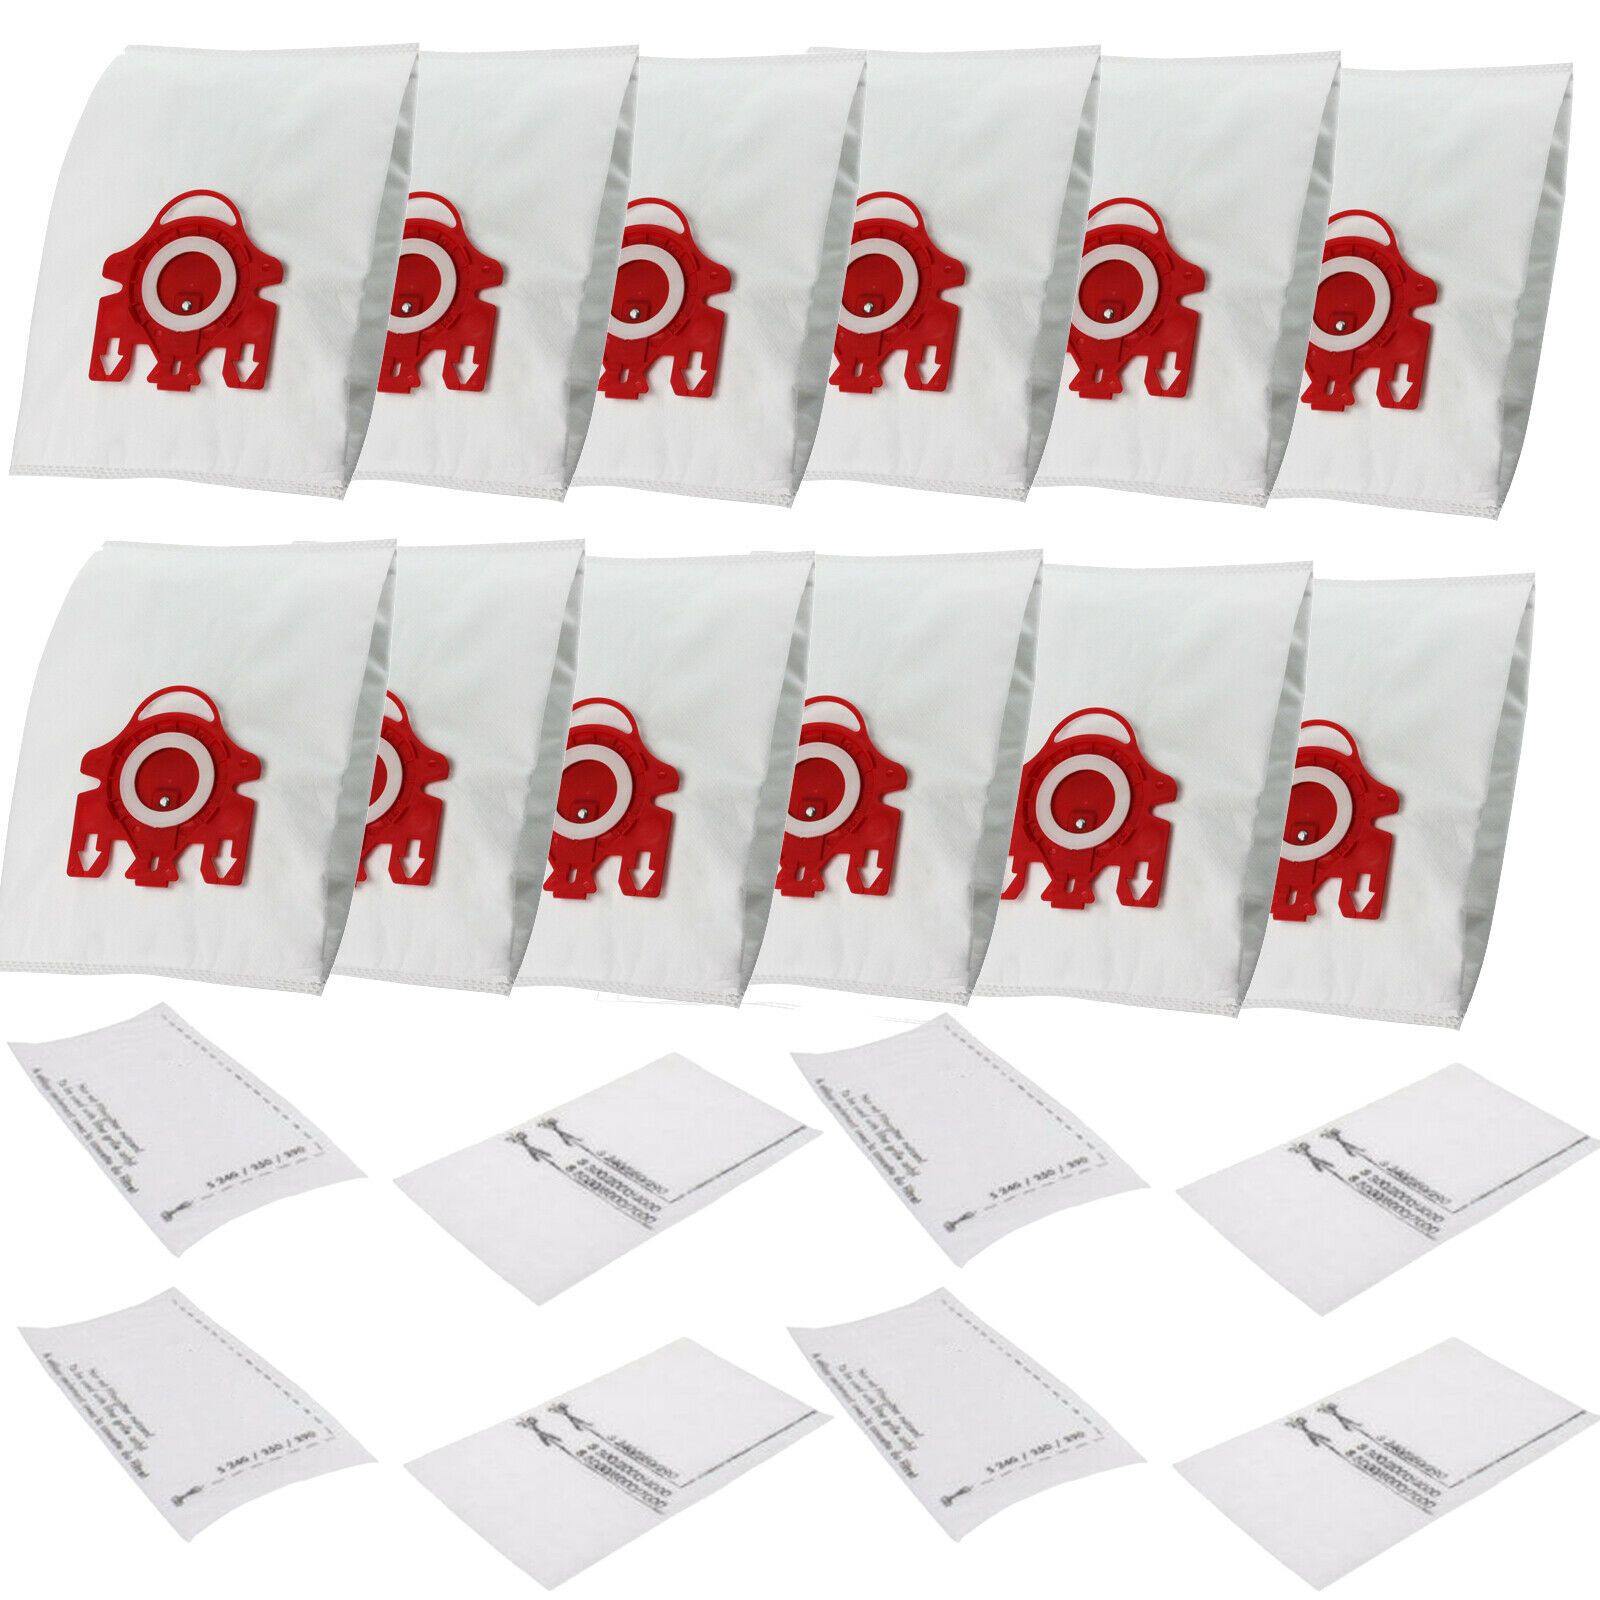 12 Dust Bags & 8 Filters For Miele FJM Vacuum Cleaner S300-S399 Hyclean 3D Type Sparesbarn